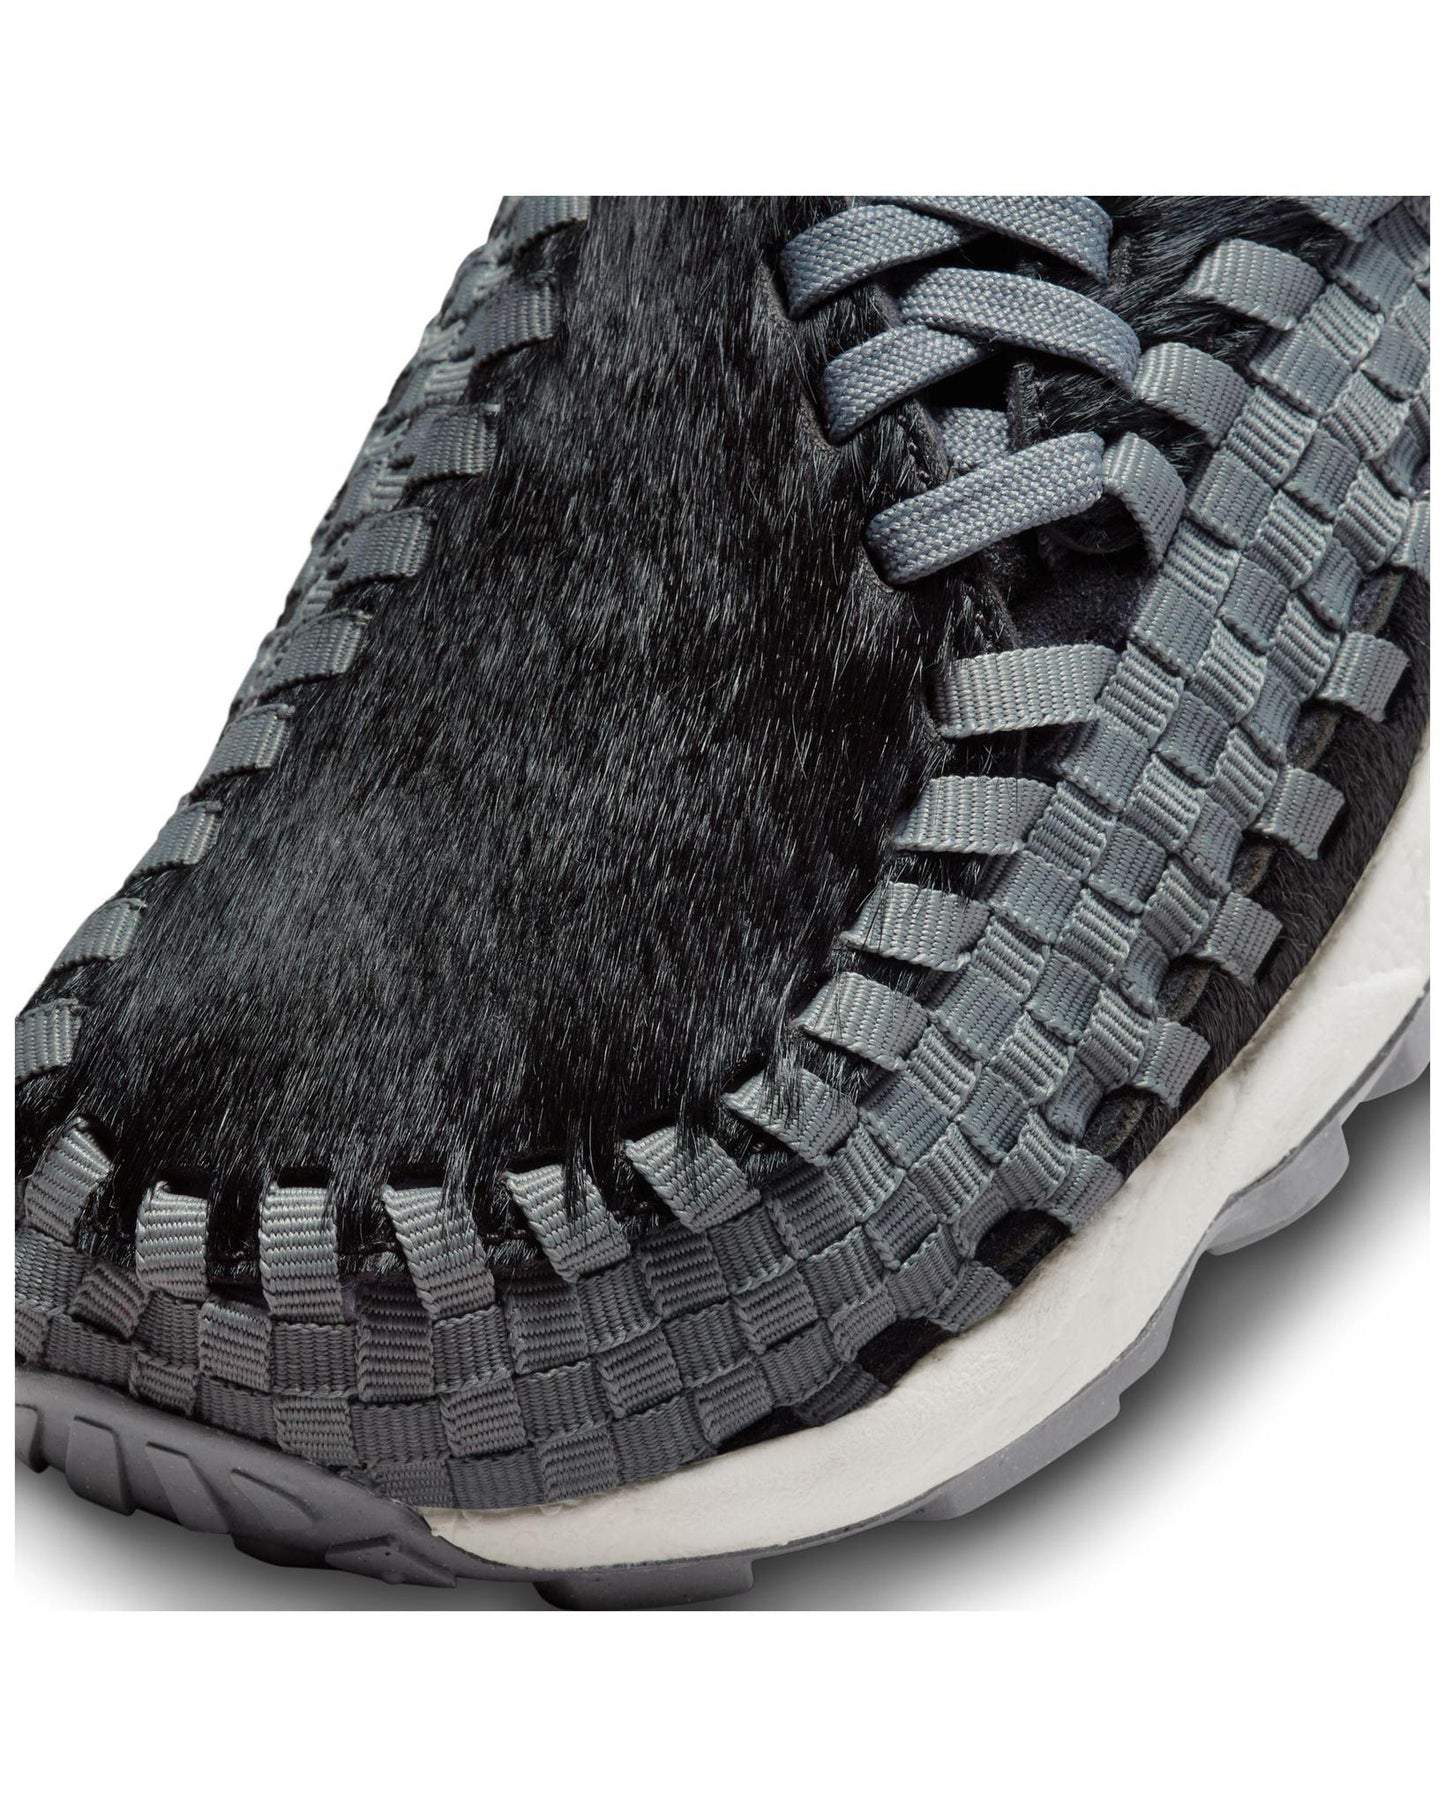 
                    
                      Nike Women's Air Footscape Woven "Black and Smoke Grey"
                    
                  